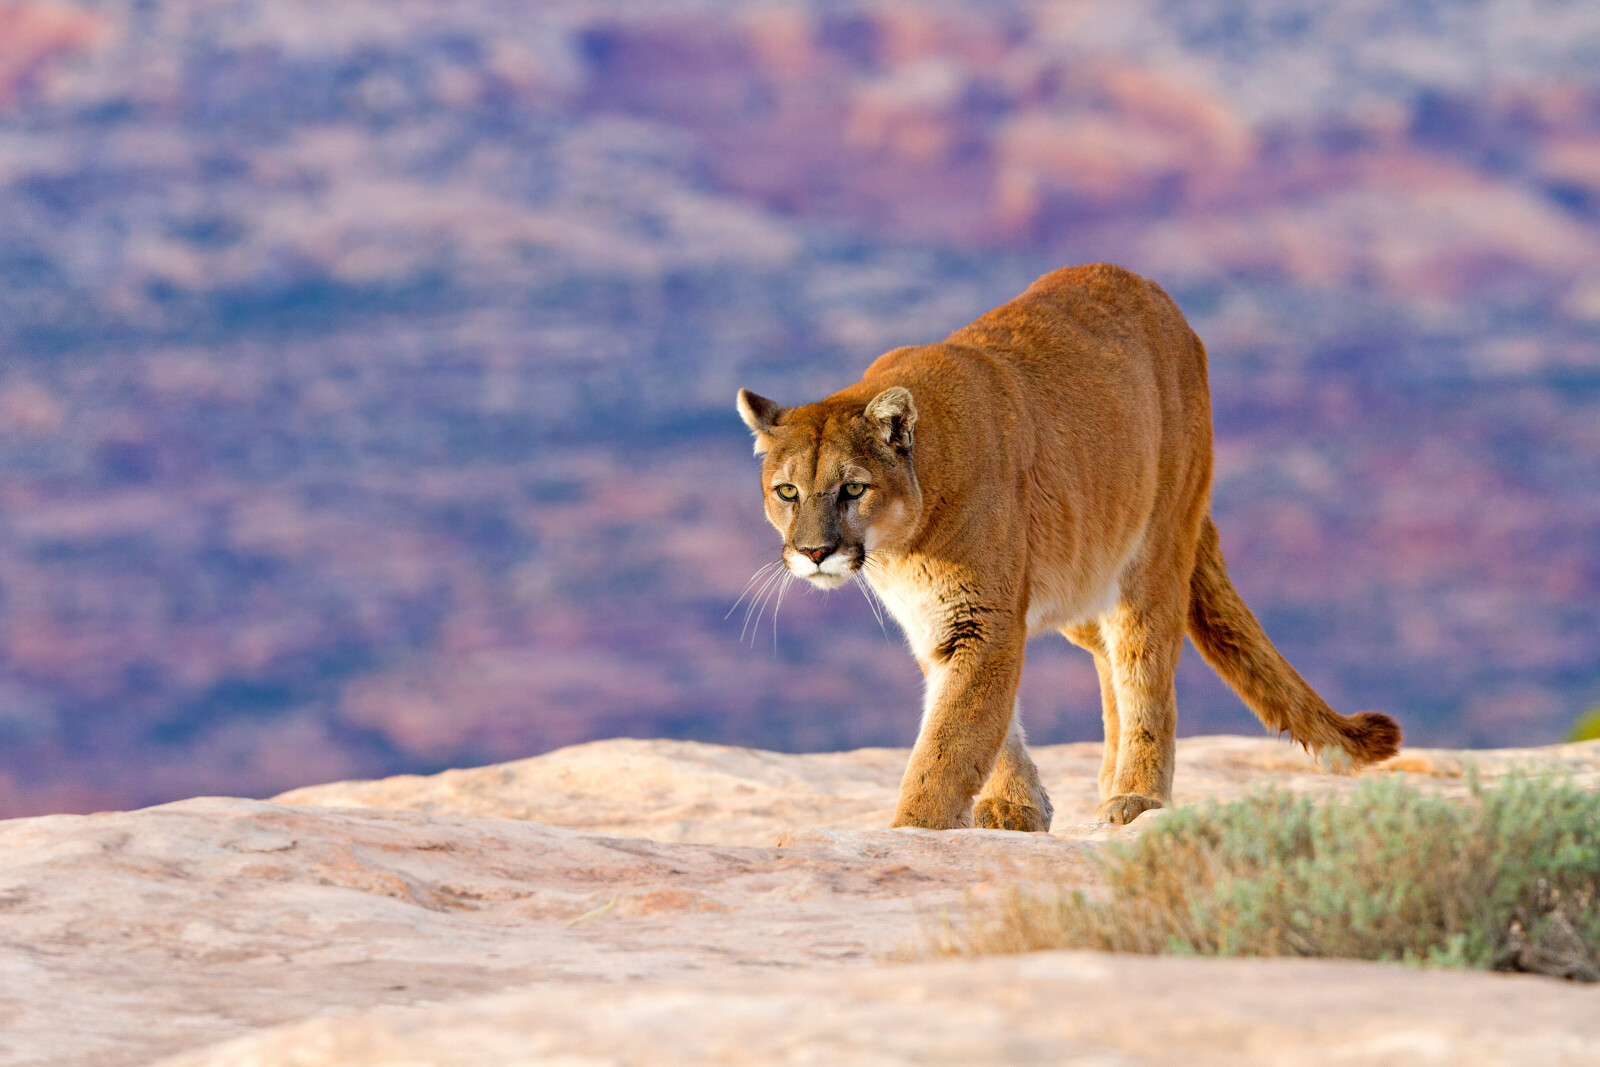 How to be safe in mountain lion country